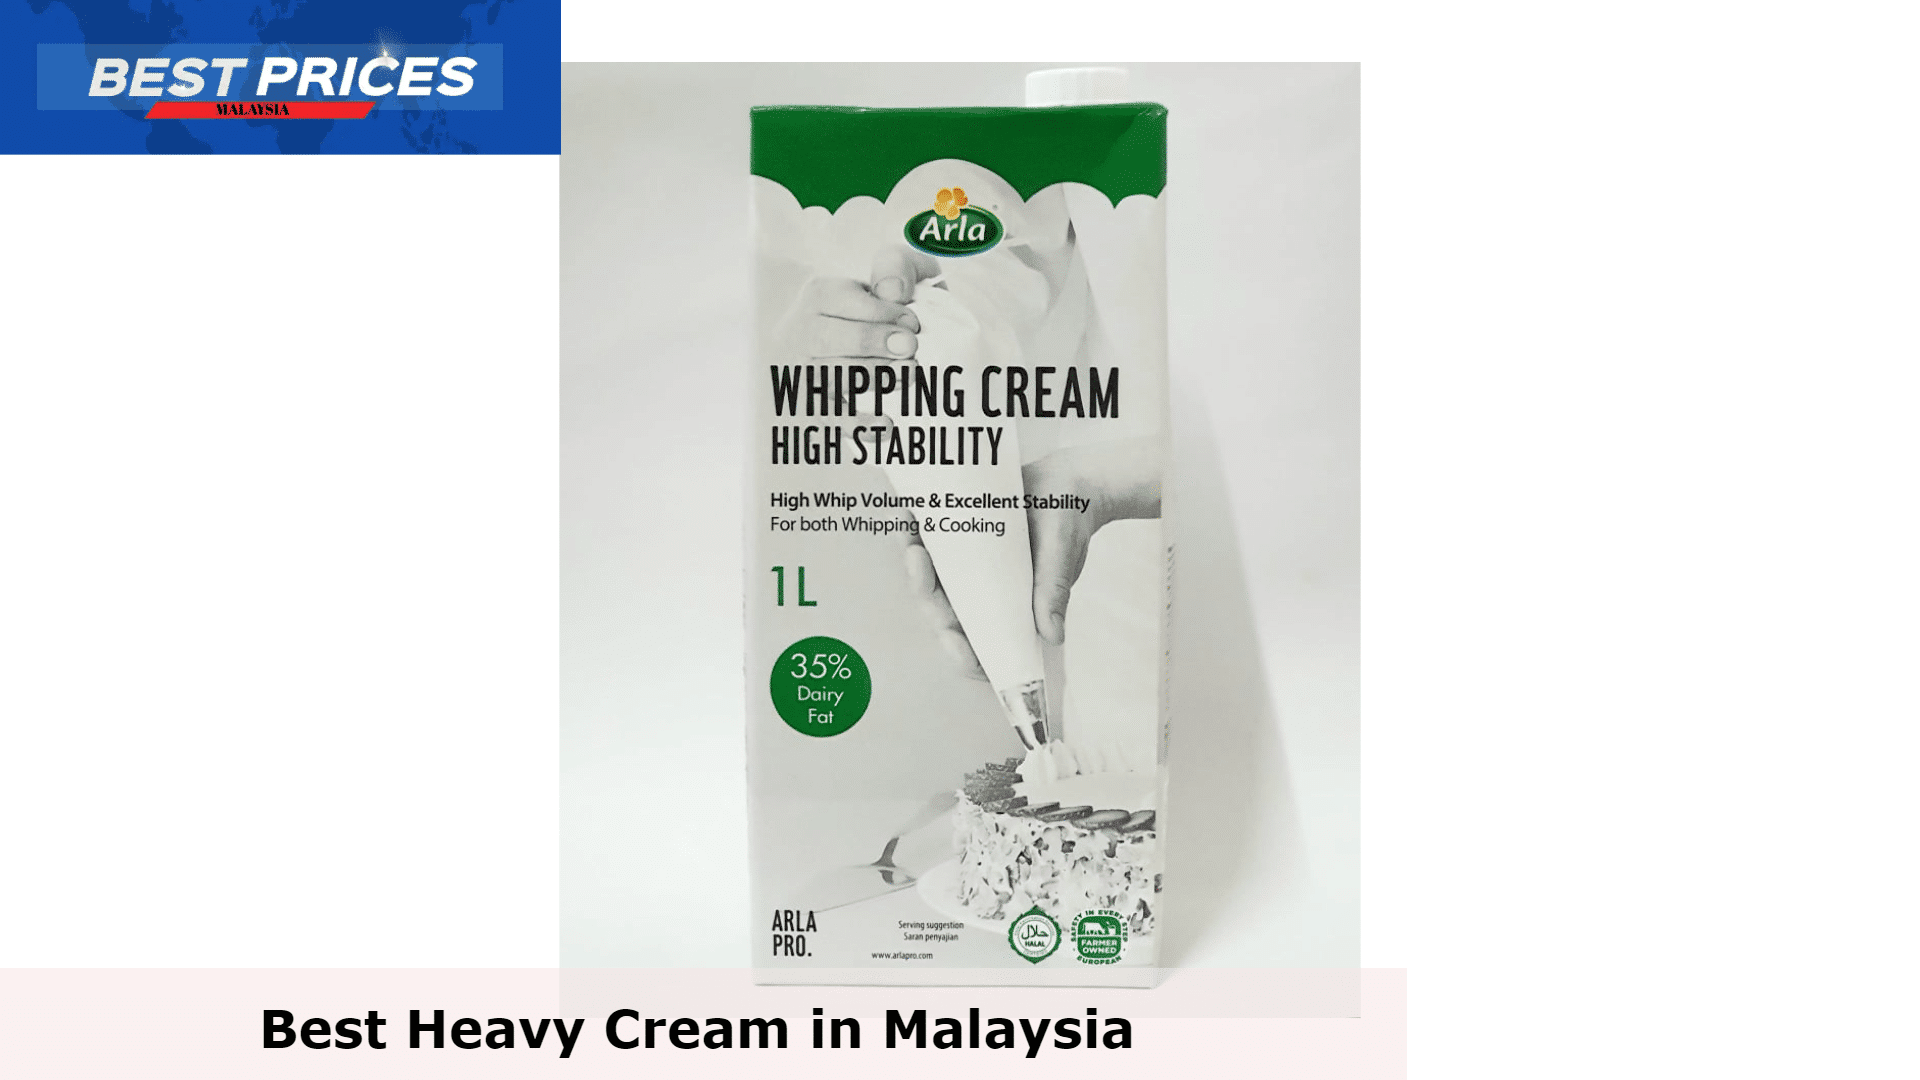 Arla Pro High Stability Whipping Cream - Best Heavy Cream in Malaysia, Heavy Cream Malaysia, heavy cream substitute, What can I use if I don't have heavy cream?, What is heavy cream equal to?, Is heavy cream and whipping cream the same?, Is there a substitute for heavy cream?, What is heavy cream called in Malaysia?, Is double cream same as heavy cream?, heavy cream substitute, heavy cream recipe, heavy cream vs whipping cream, what is heavy cream used for, where to buy heavy cream, healthy substitute for heavy cream, Best Rated Heavy Cream Brands We Have Tested in Malaysia, What brand is good for heavy cream in Malaysia?, the best heavy cream for pasta, best heavy cream for coffee,